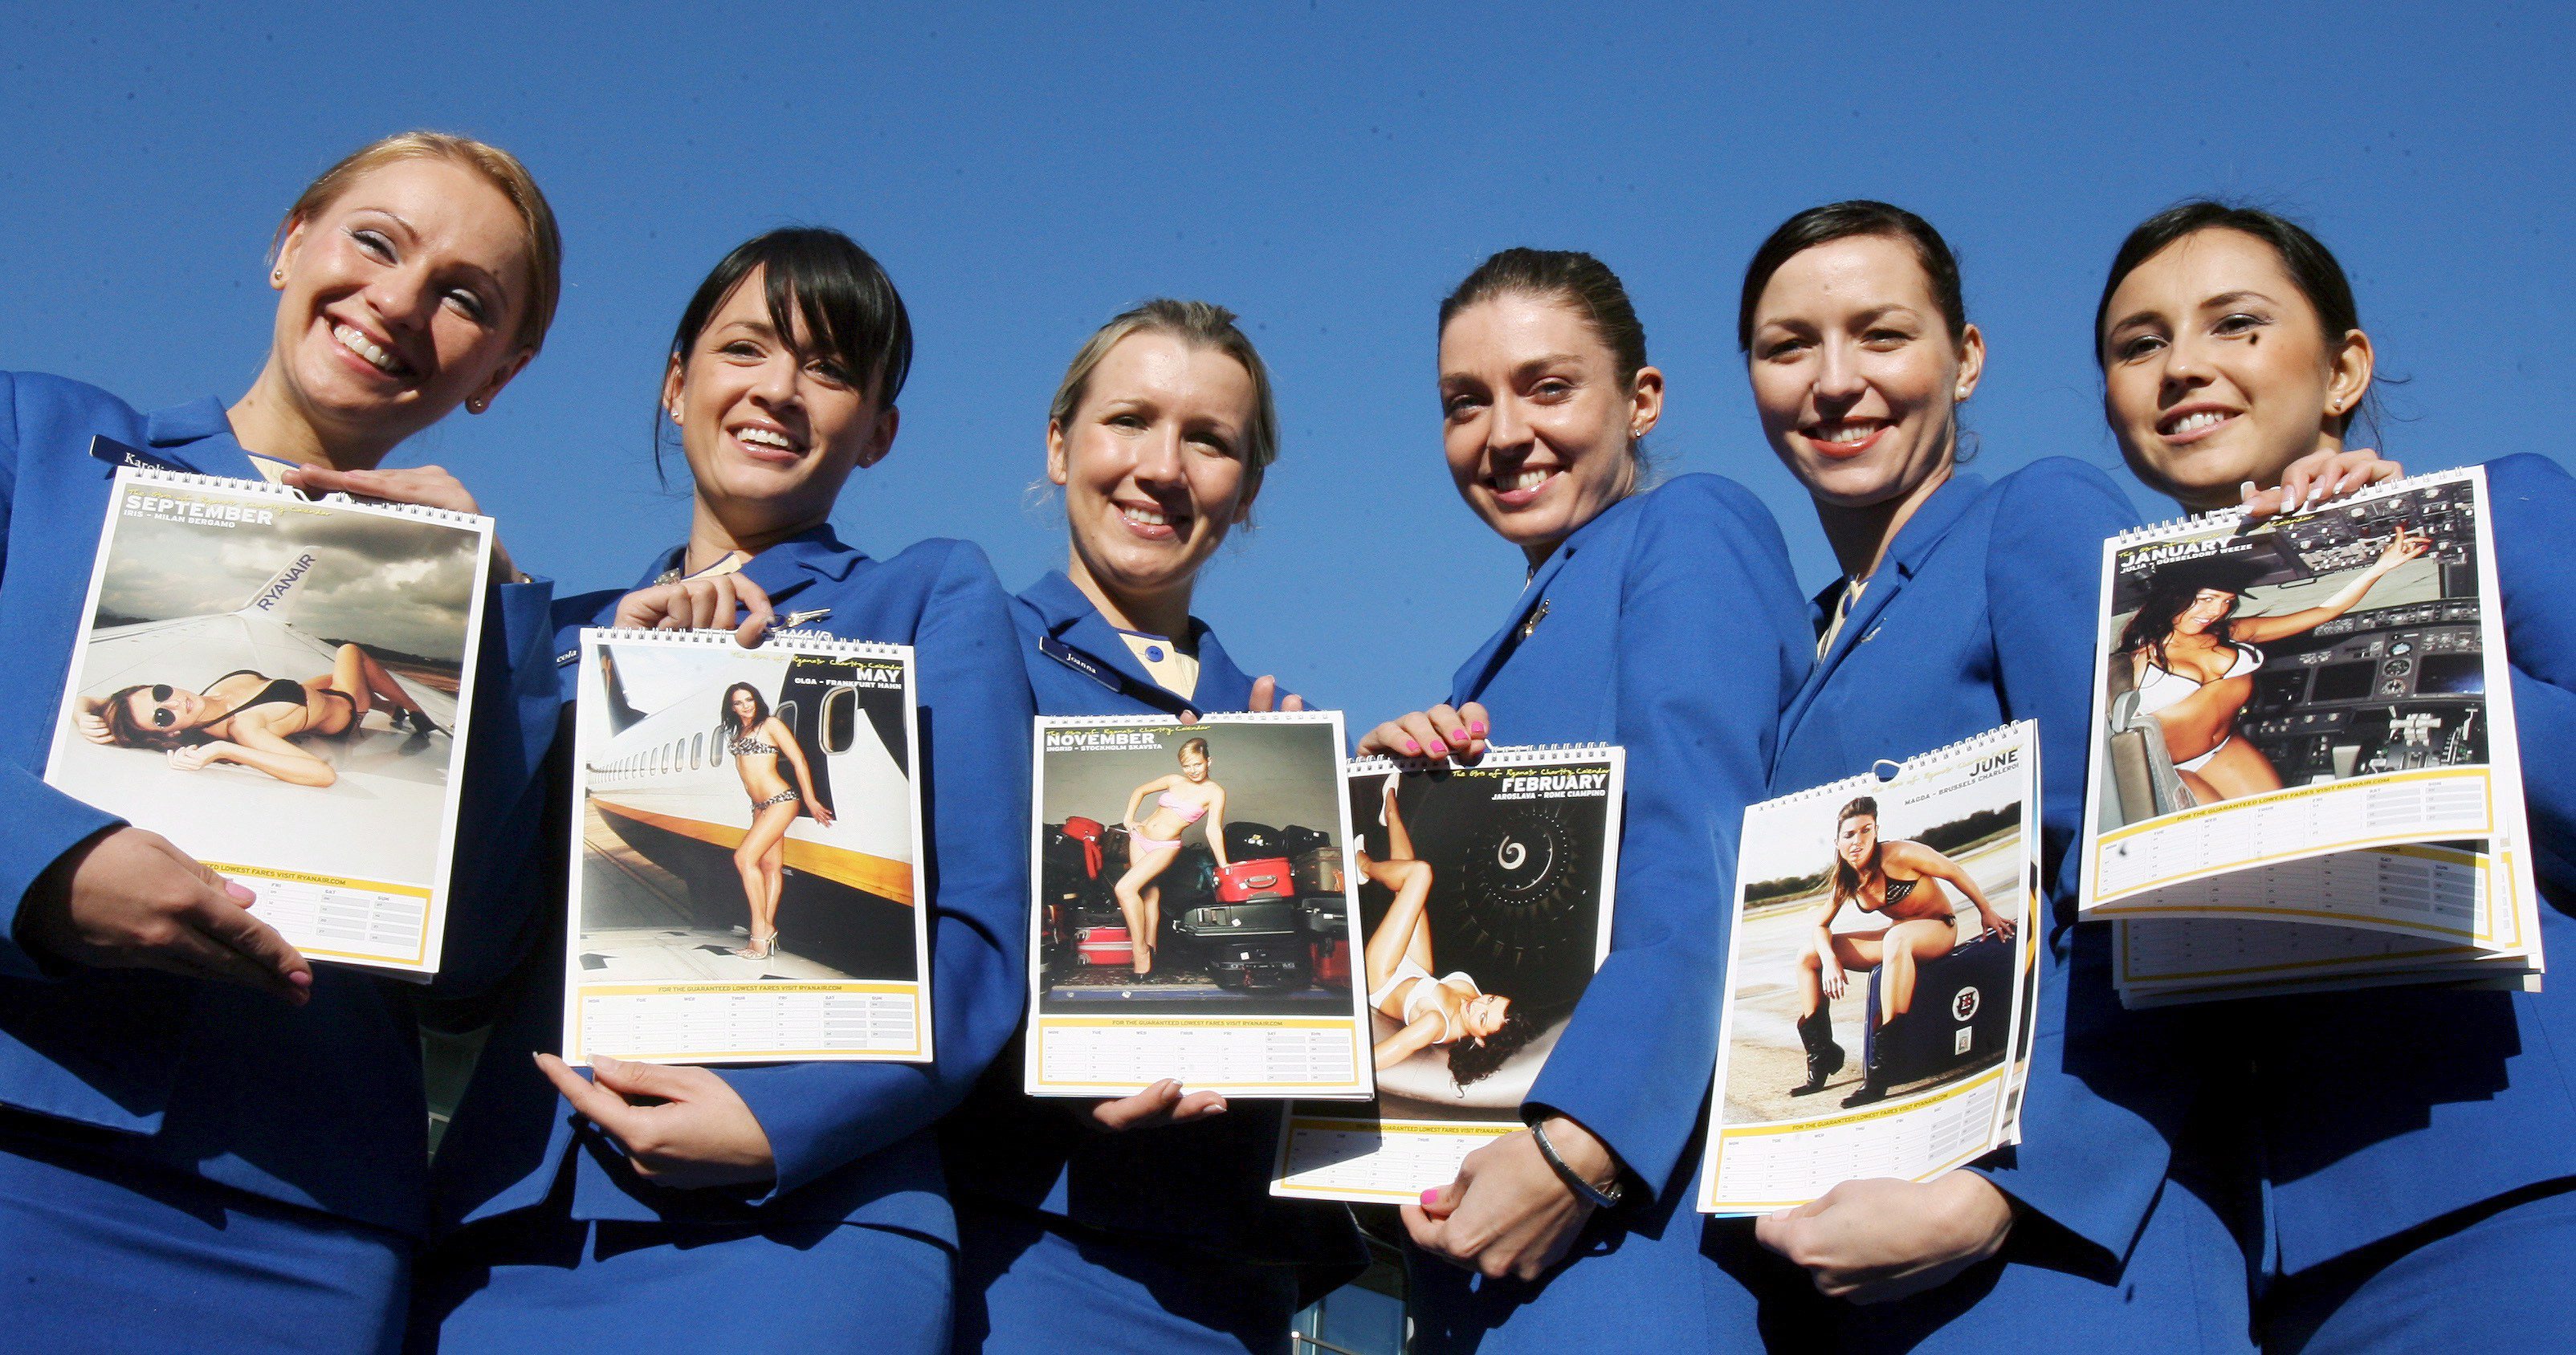 2007-11-15 14:07:51 epa01173777 Ryanair cabin crew calendar girls hold the 2008 Ryanair charity calendar in London, Britain, 15 November 2007. Ryanair, Europe's largest low fares airline, unveiled the new Ryanair charity calendar with their own cabin crew staff stripping down to their bare essentials. Proceeds from the calendar will go toward children with special needs. EPA/ANDY RAIN